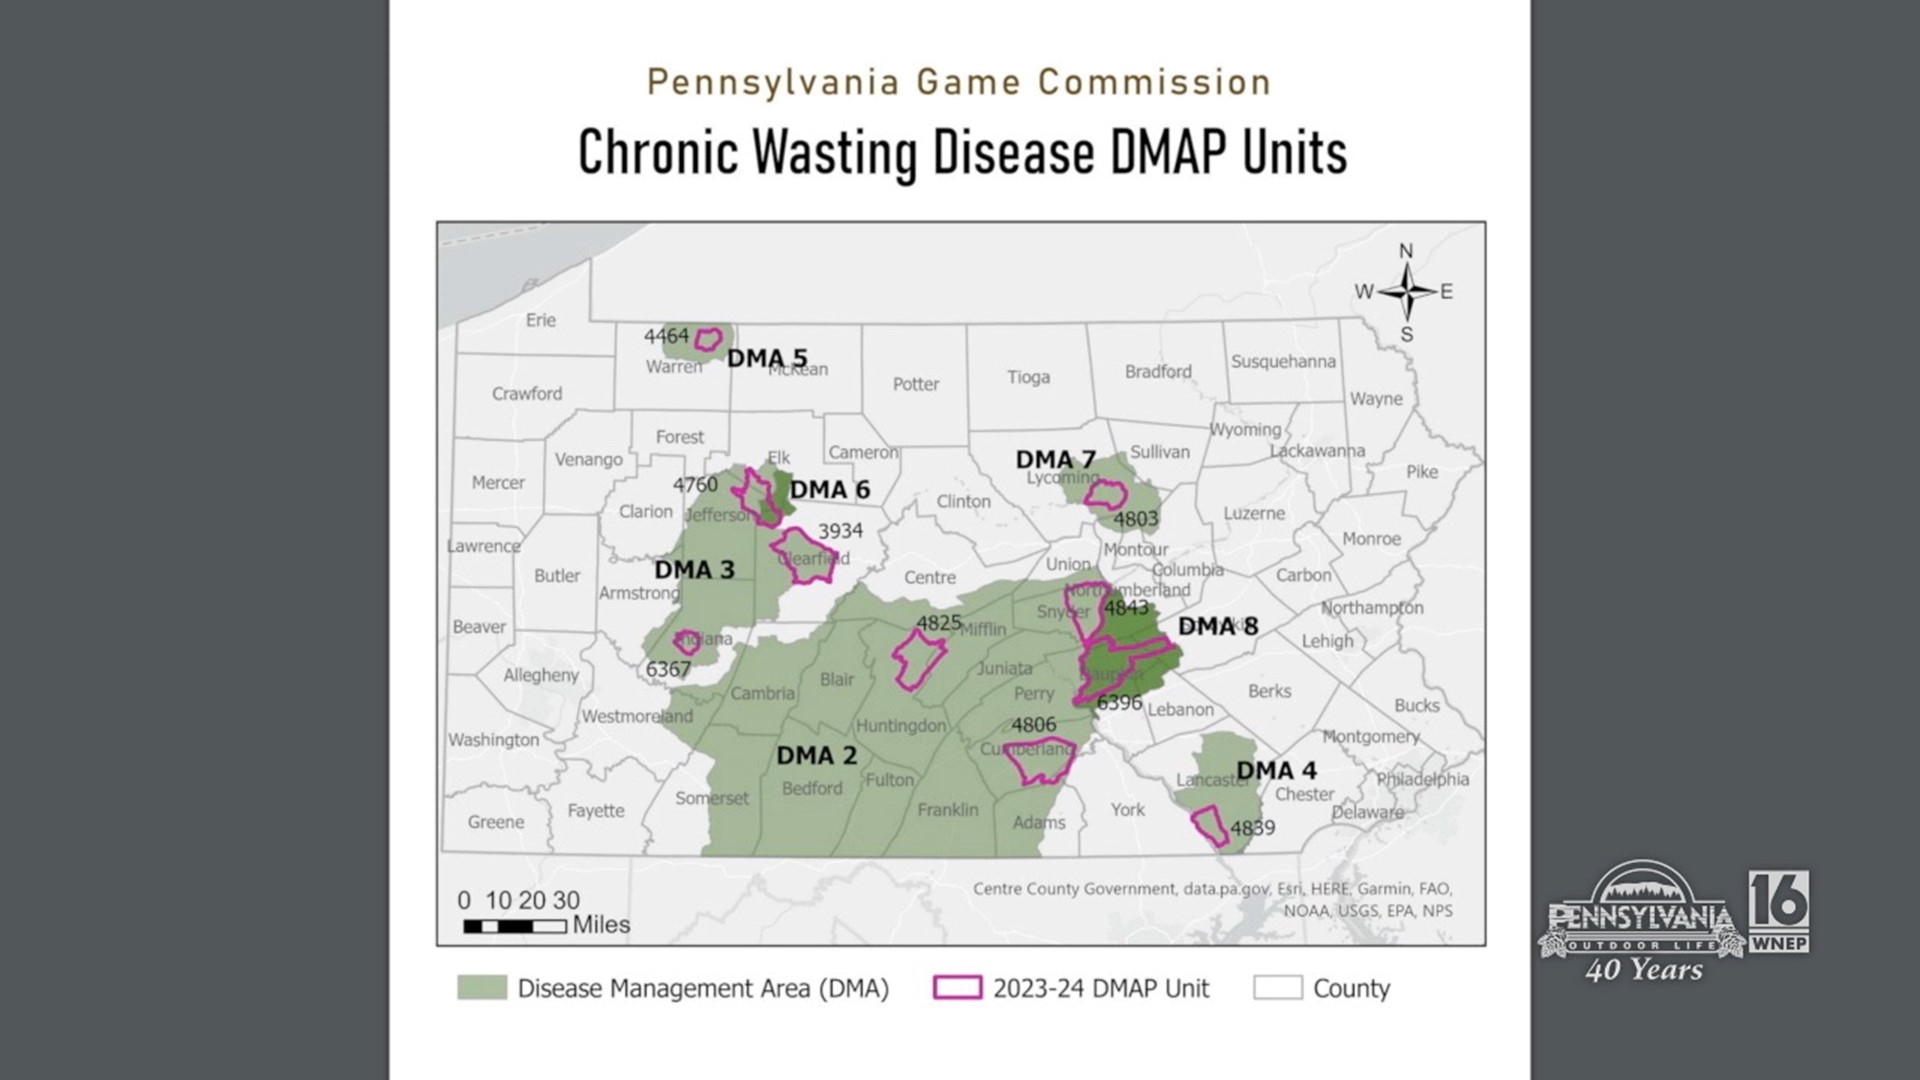 It's up to us to help control the spread of Chronic Wasting Disease in Pennsylvania.